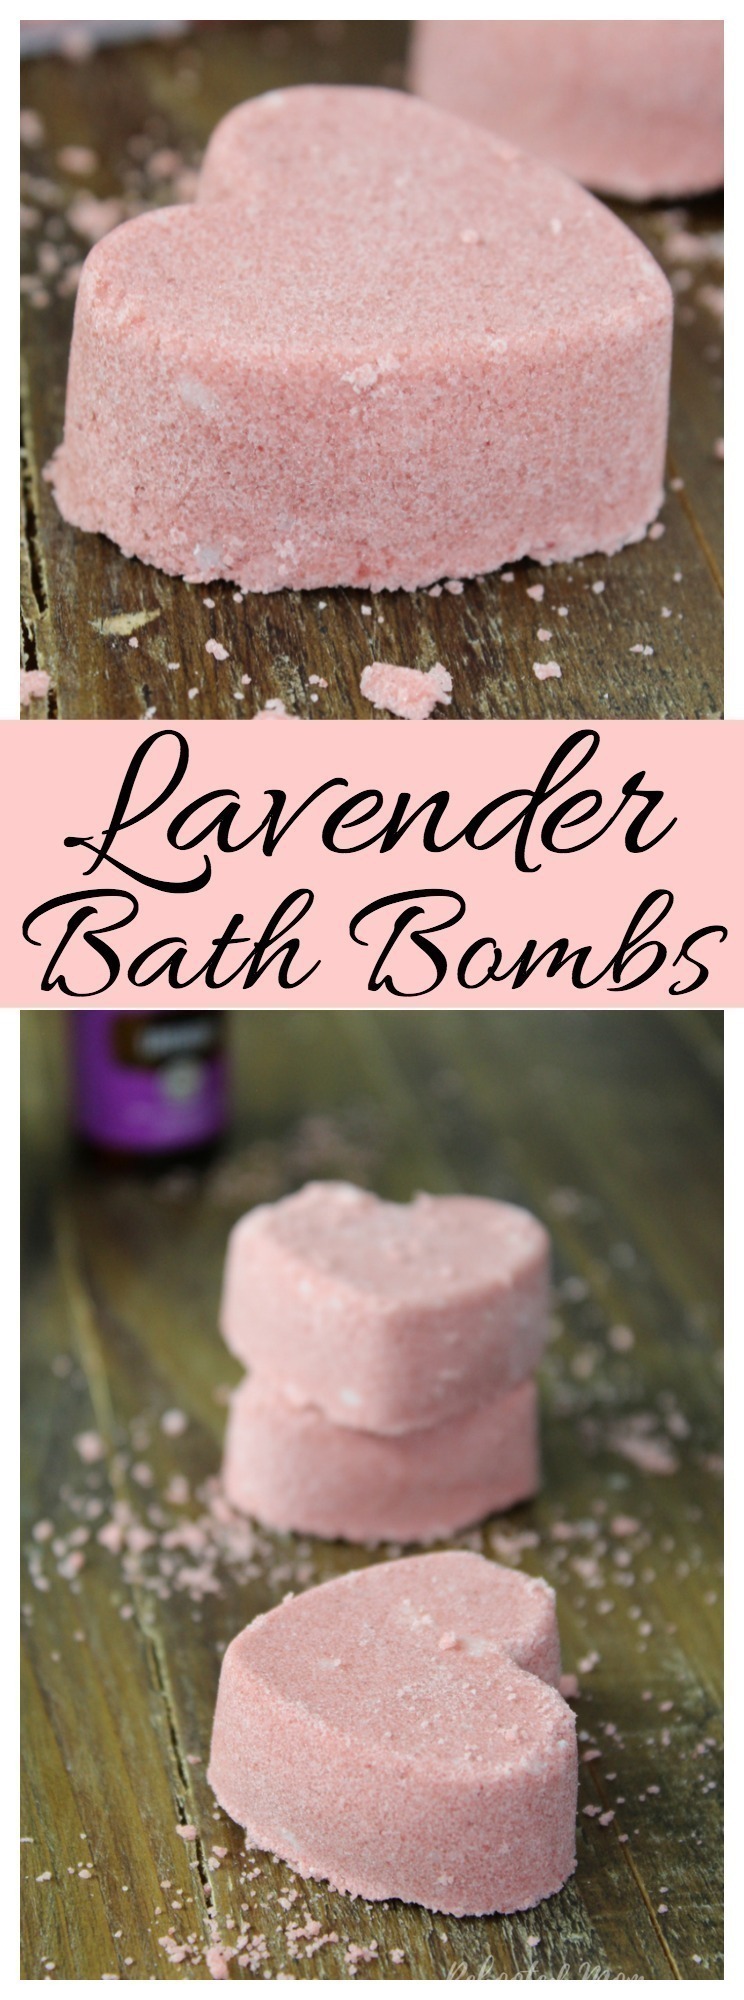 These Lavender Bath Bombs are incredibly easy to make - just 3 simple ingredients plus a few drops of your favorite Essential Oils!